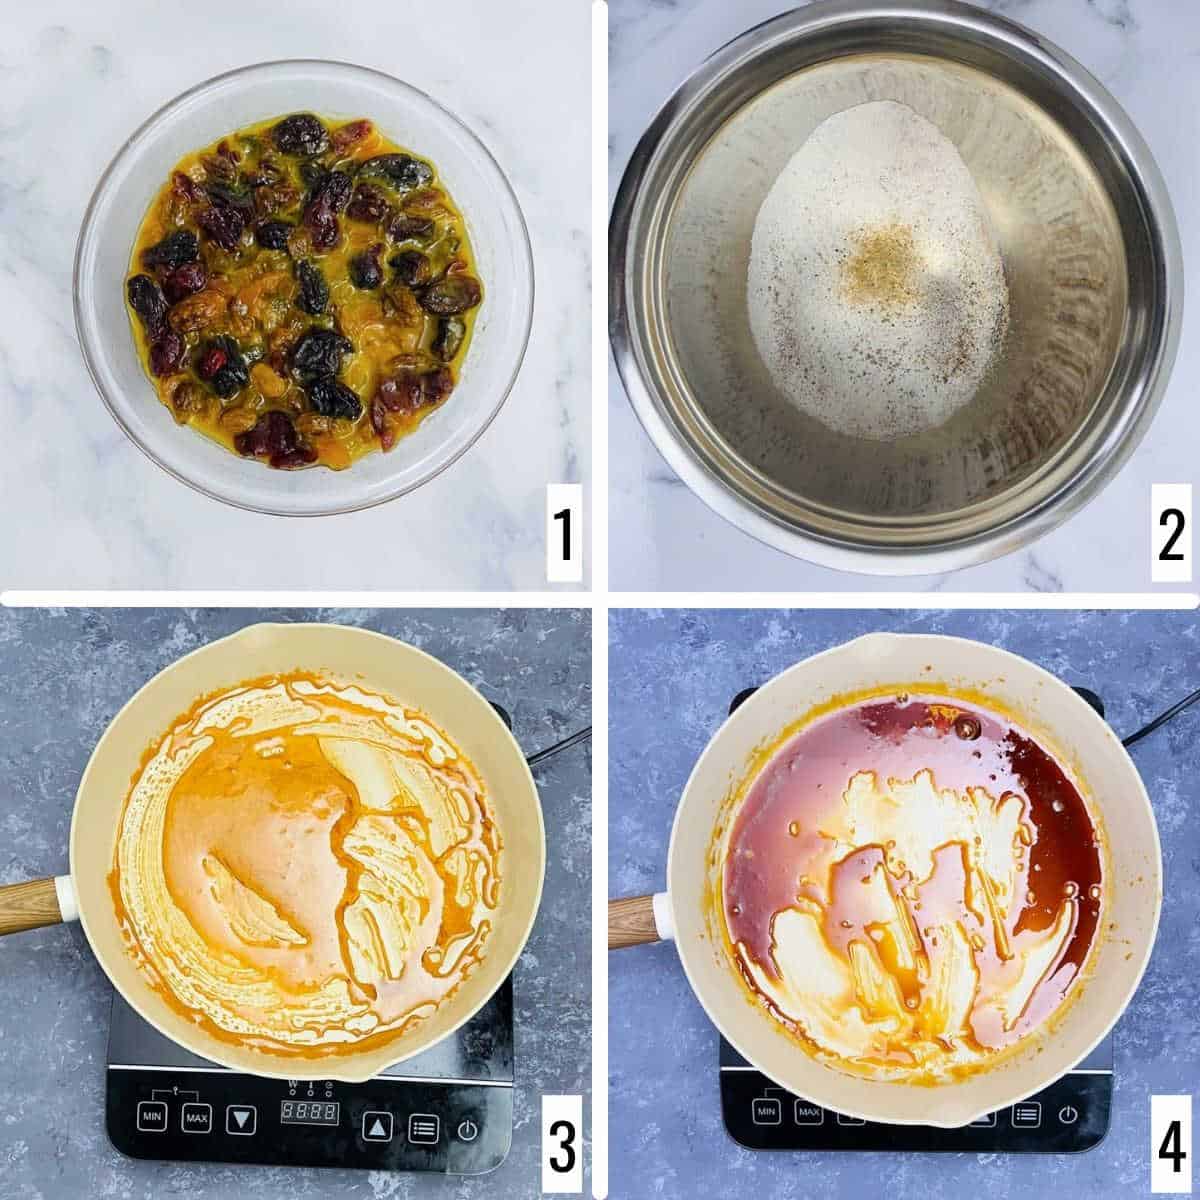 Four-step collage showing the initial steps of cake making.